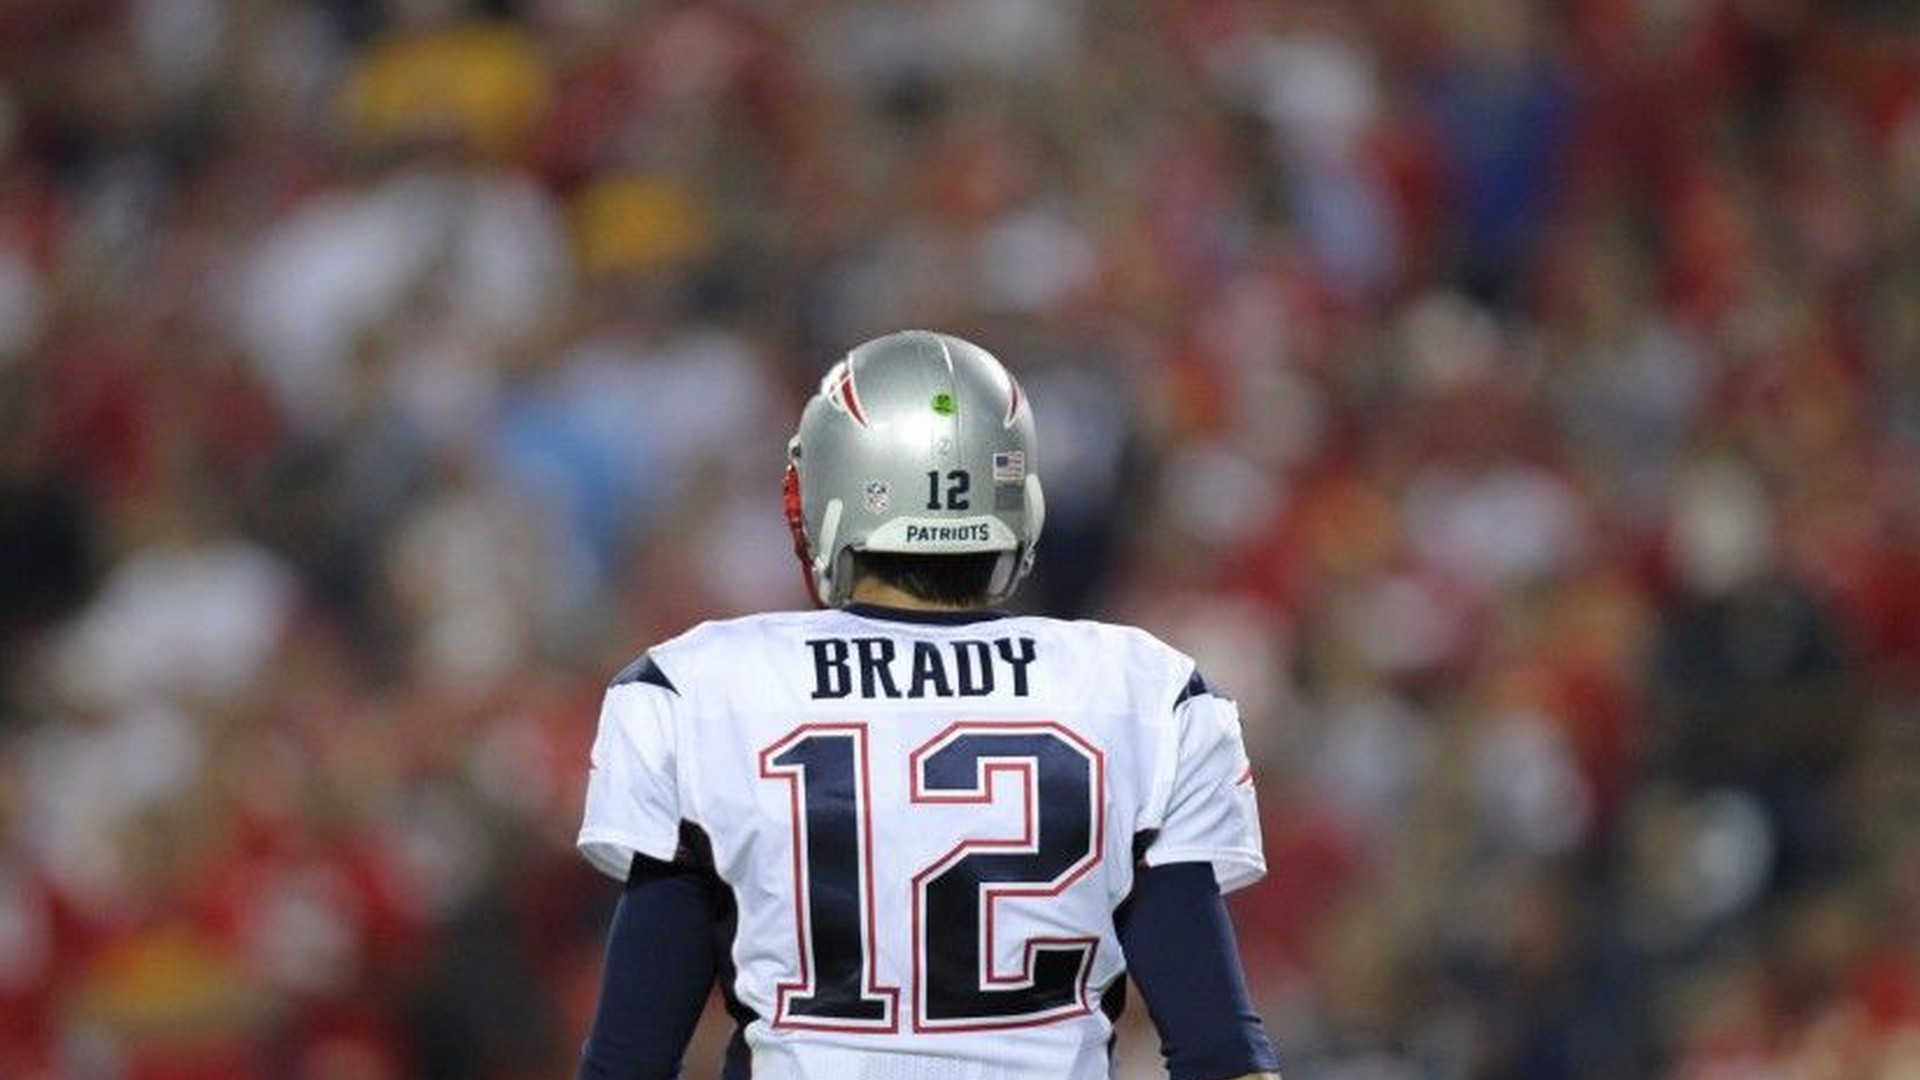 Wallpapers Computer Tom Brady Patriots With Resolution 1920X1080 pixel. You can make this wallpaper for your Desktop Computer Backgrounds, Mac Wallpapers, Android Lock screen or iPhone Screensavers